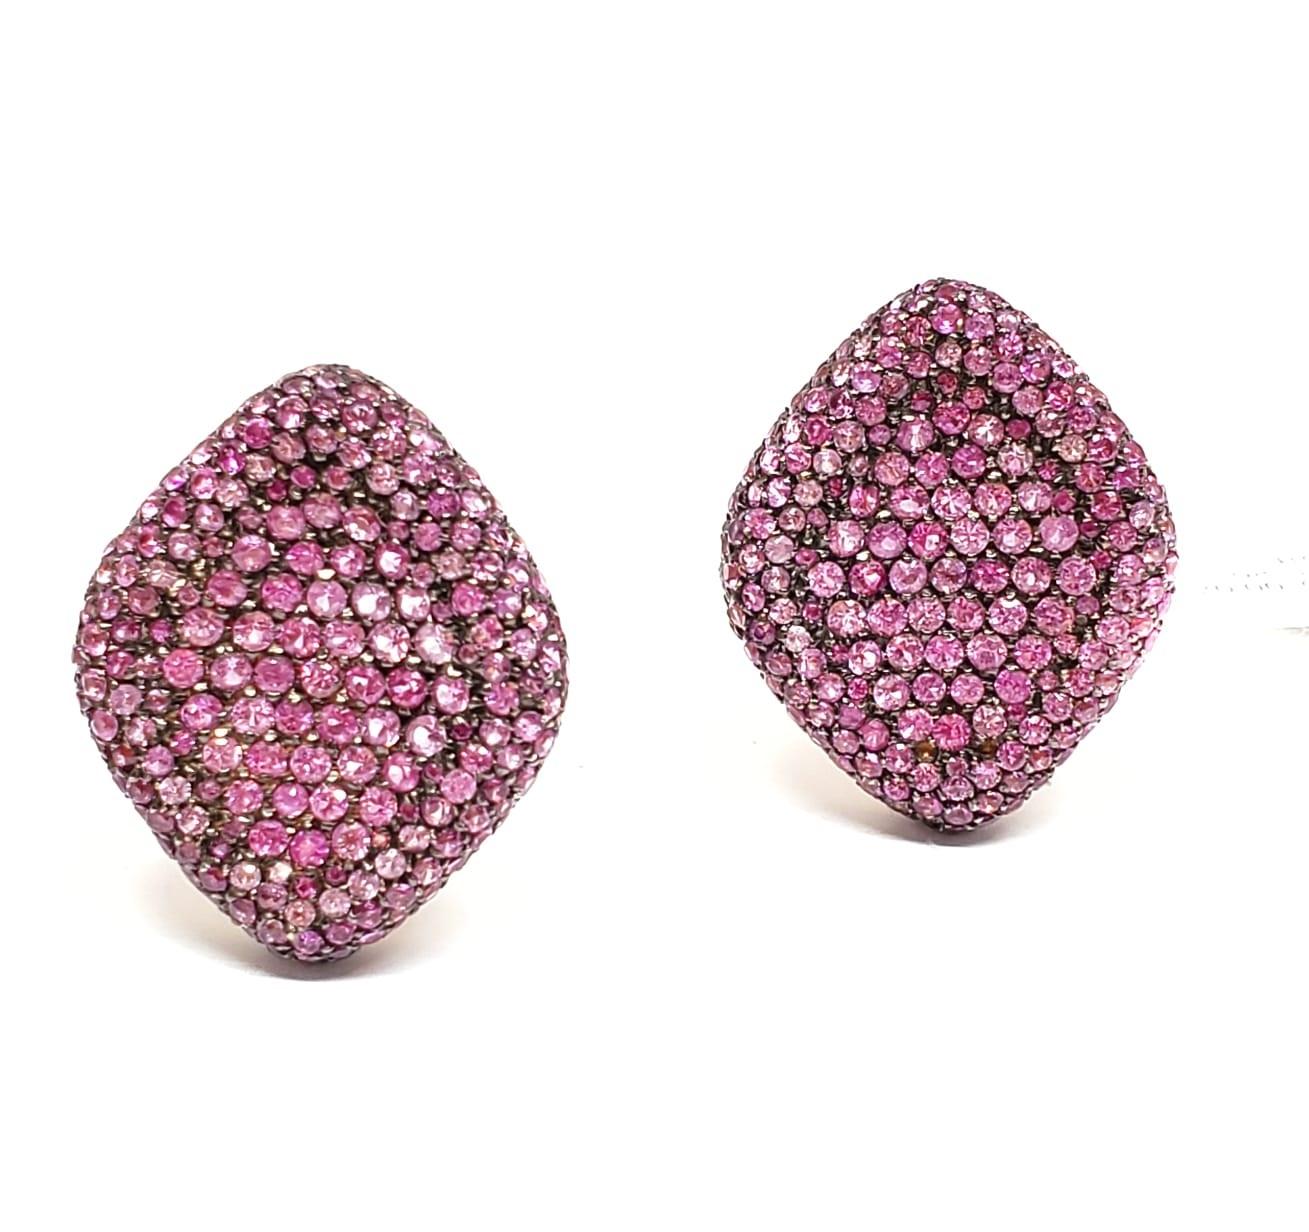 Andreoli Pink Sapphire 18 Karat Gold Earrings

These earrings feature:
- 7.08 Carat Pink Sapphire
- 20.00 Gram 18K Gold
- Made In Italy